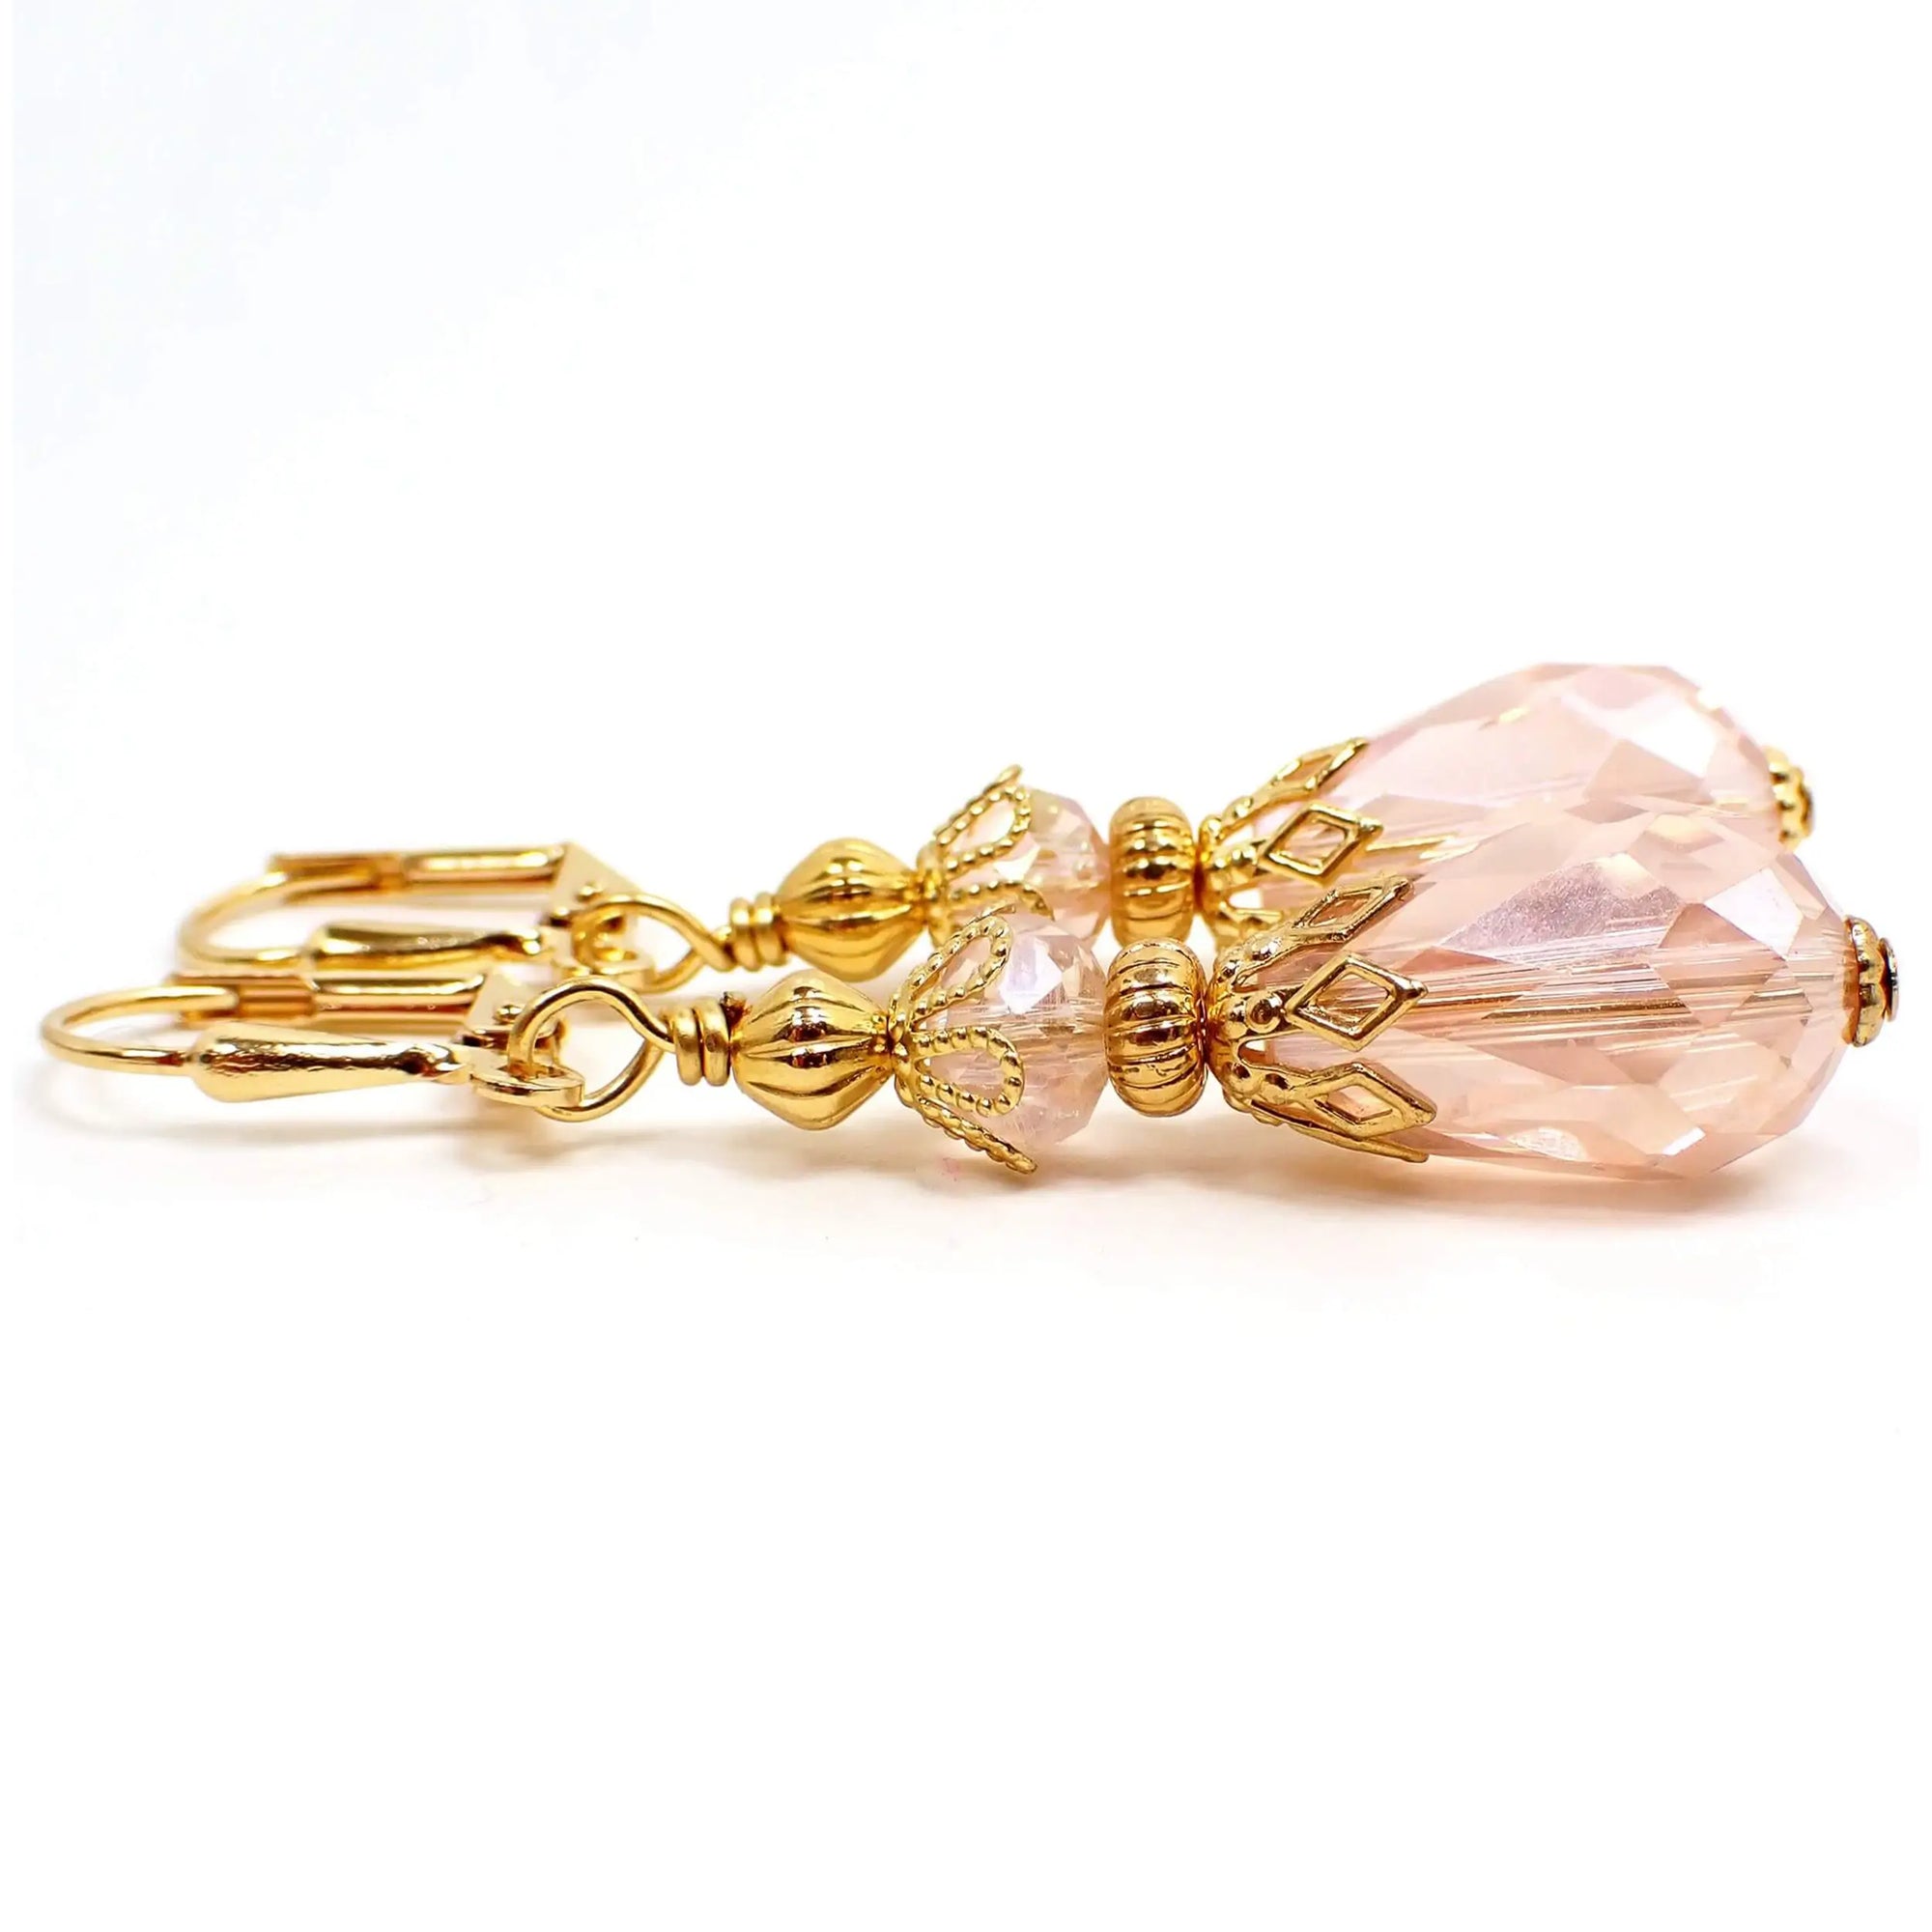 Side view of the light pink teardrop earrings. The metal is gold plated in color. There are faceted glass crystal rondelle beads at the top and faceted glass crystal teardrop beads at the bottom. The beads are a light pink in color.